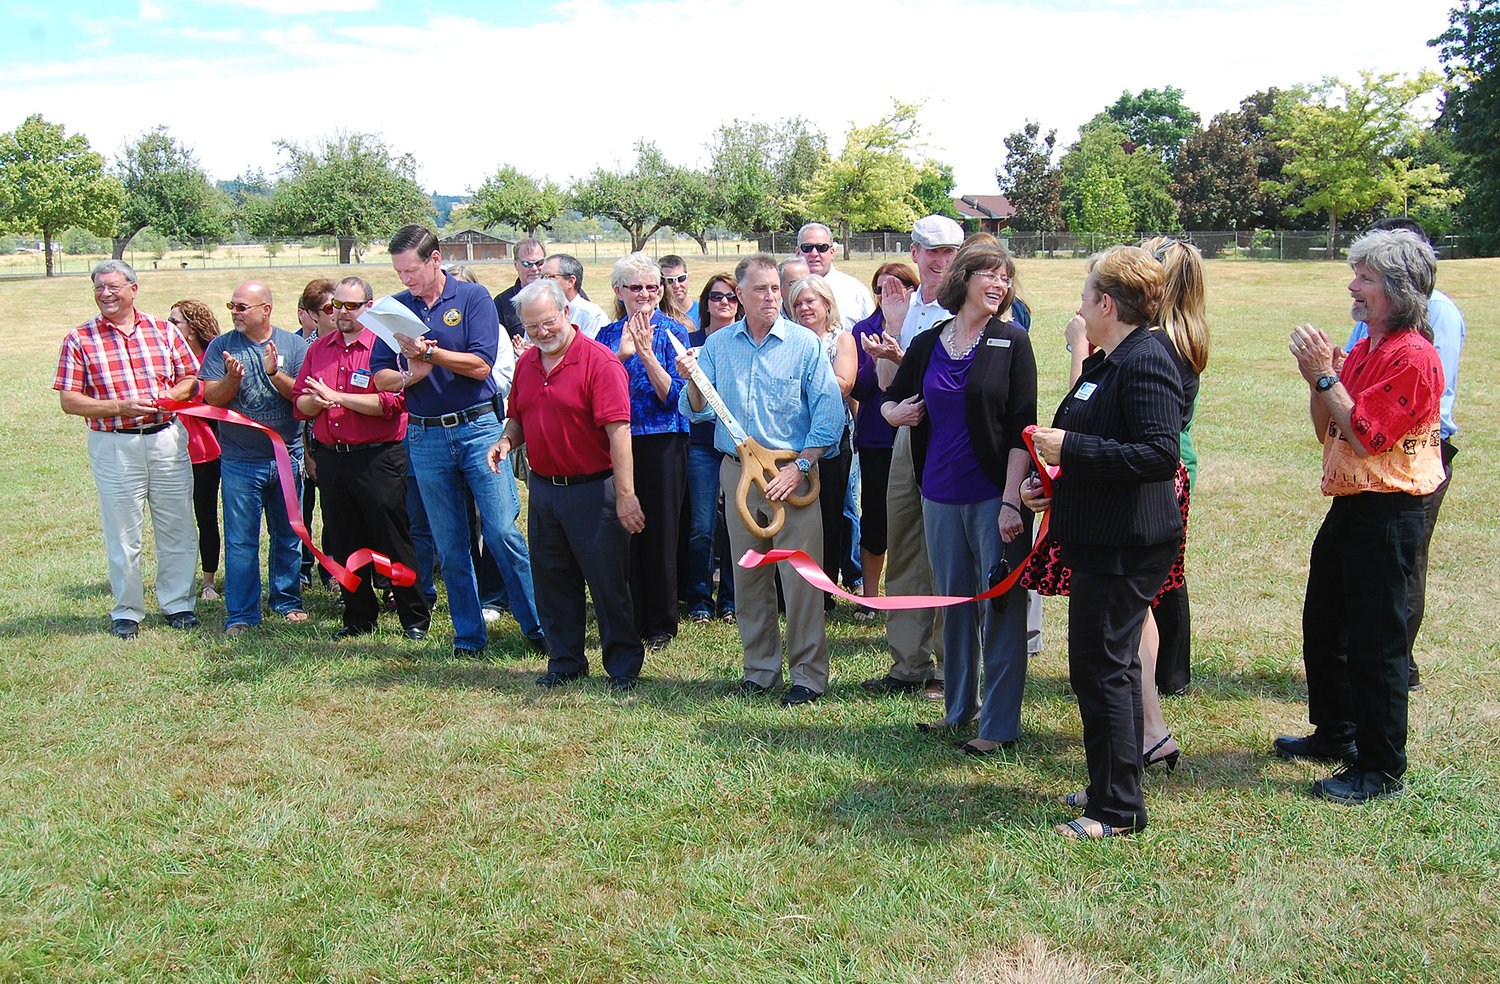 Civic leaders and members of the Centralia-Chehalis Chamber of Commerce applaud after former Chehalis Mayor Tony Ketchum cuts a ribbon at Stan Hedwall Park Monday afternoon.